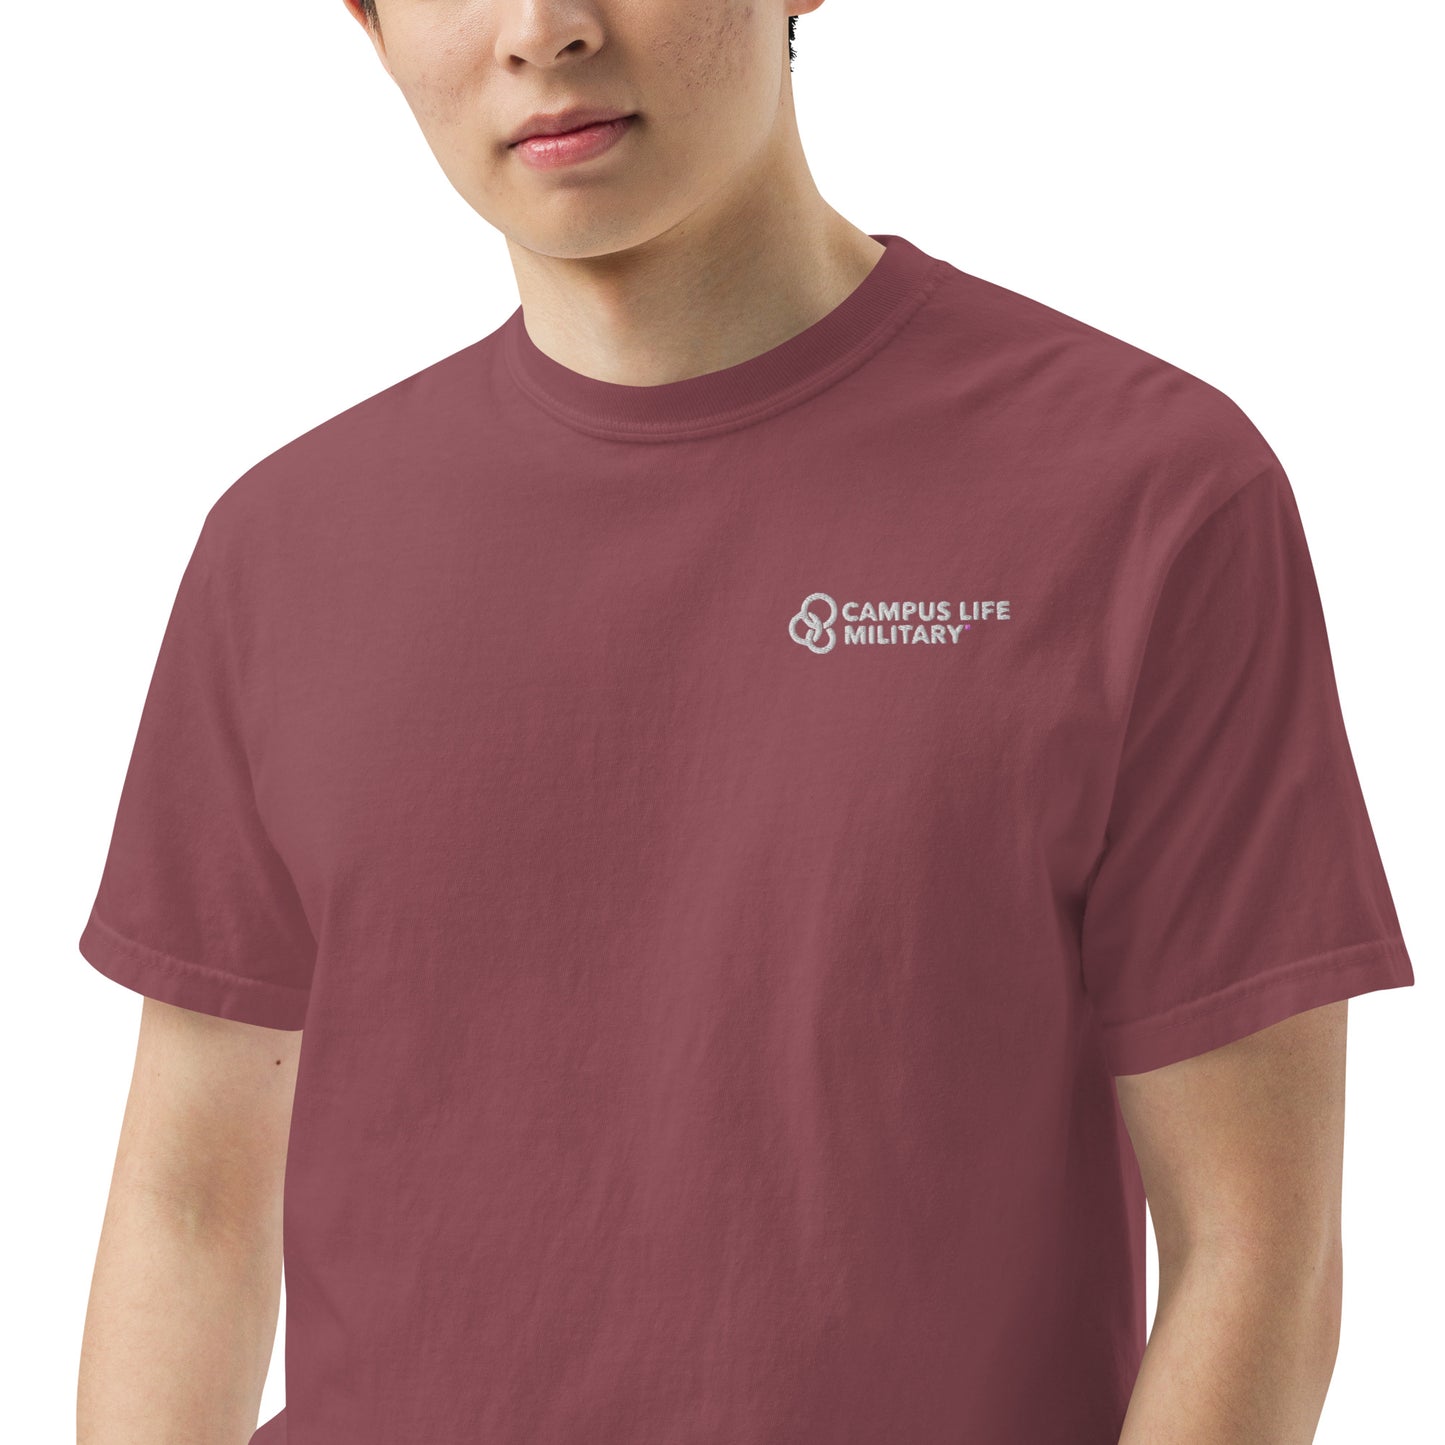 Campus Life Military Men’s Embroidered garment-dyed heavyweight t-shirt